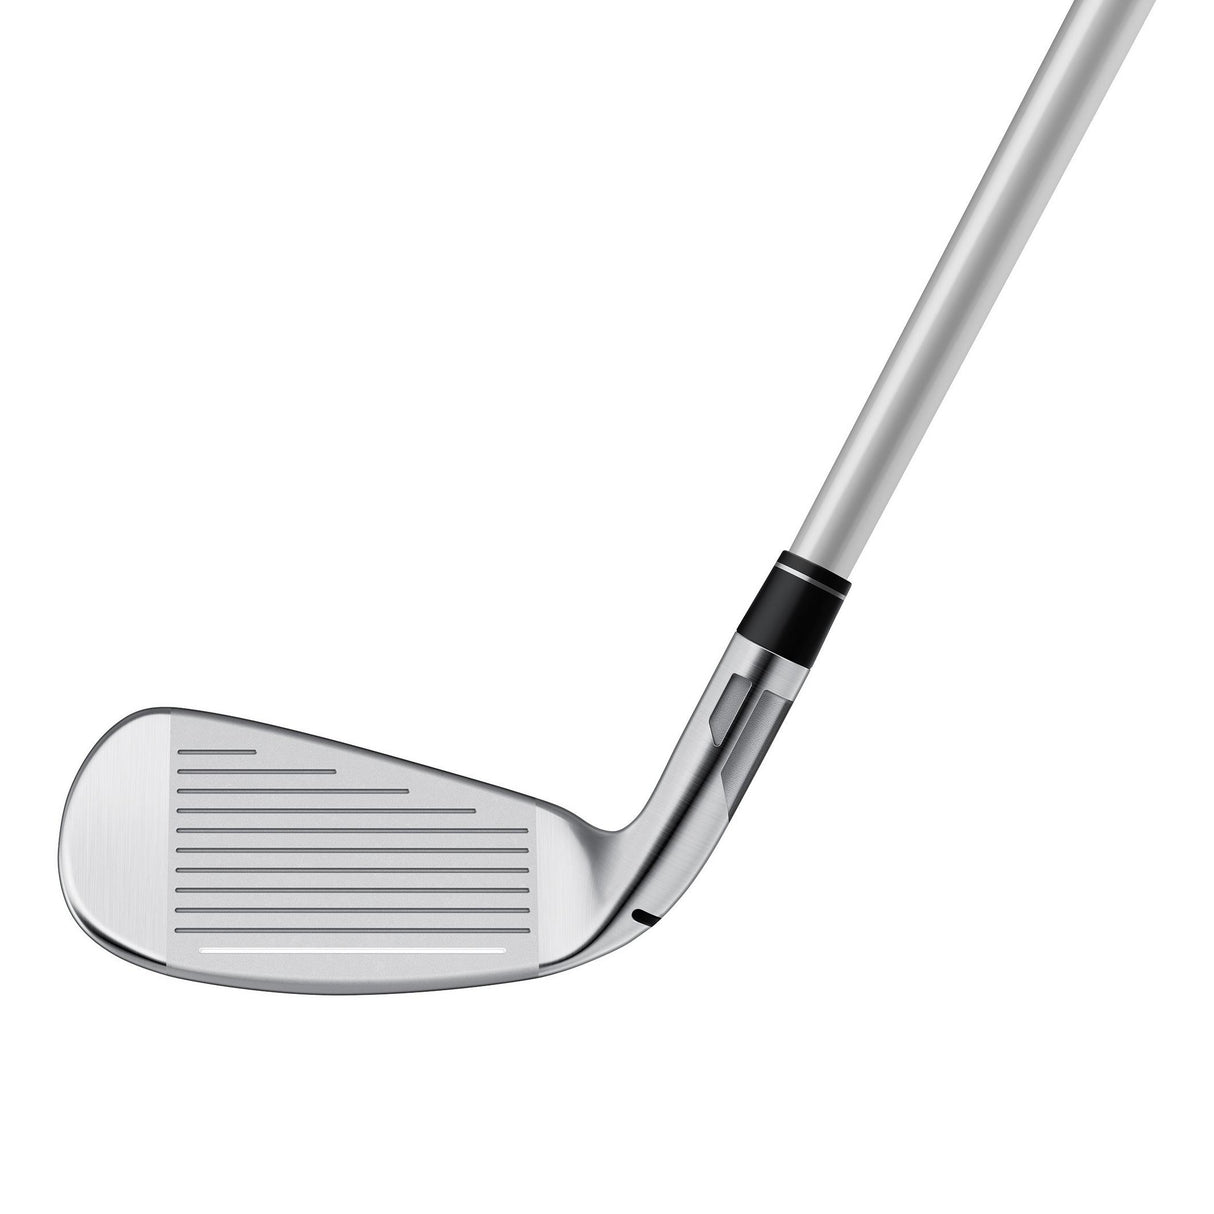 TaylorMade Stealth Women's HD Iron Set with Graphite Shafts - Niagara Golf Warehouse TAYLORMADE Iron Sets